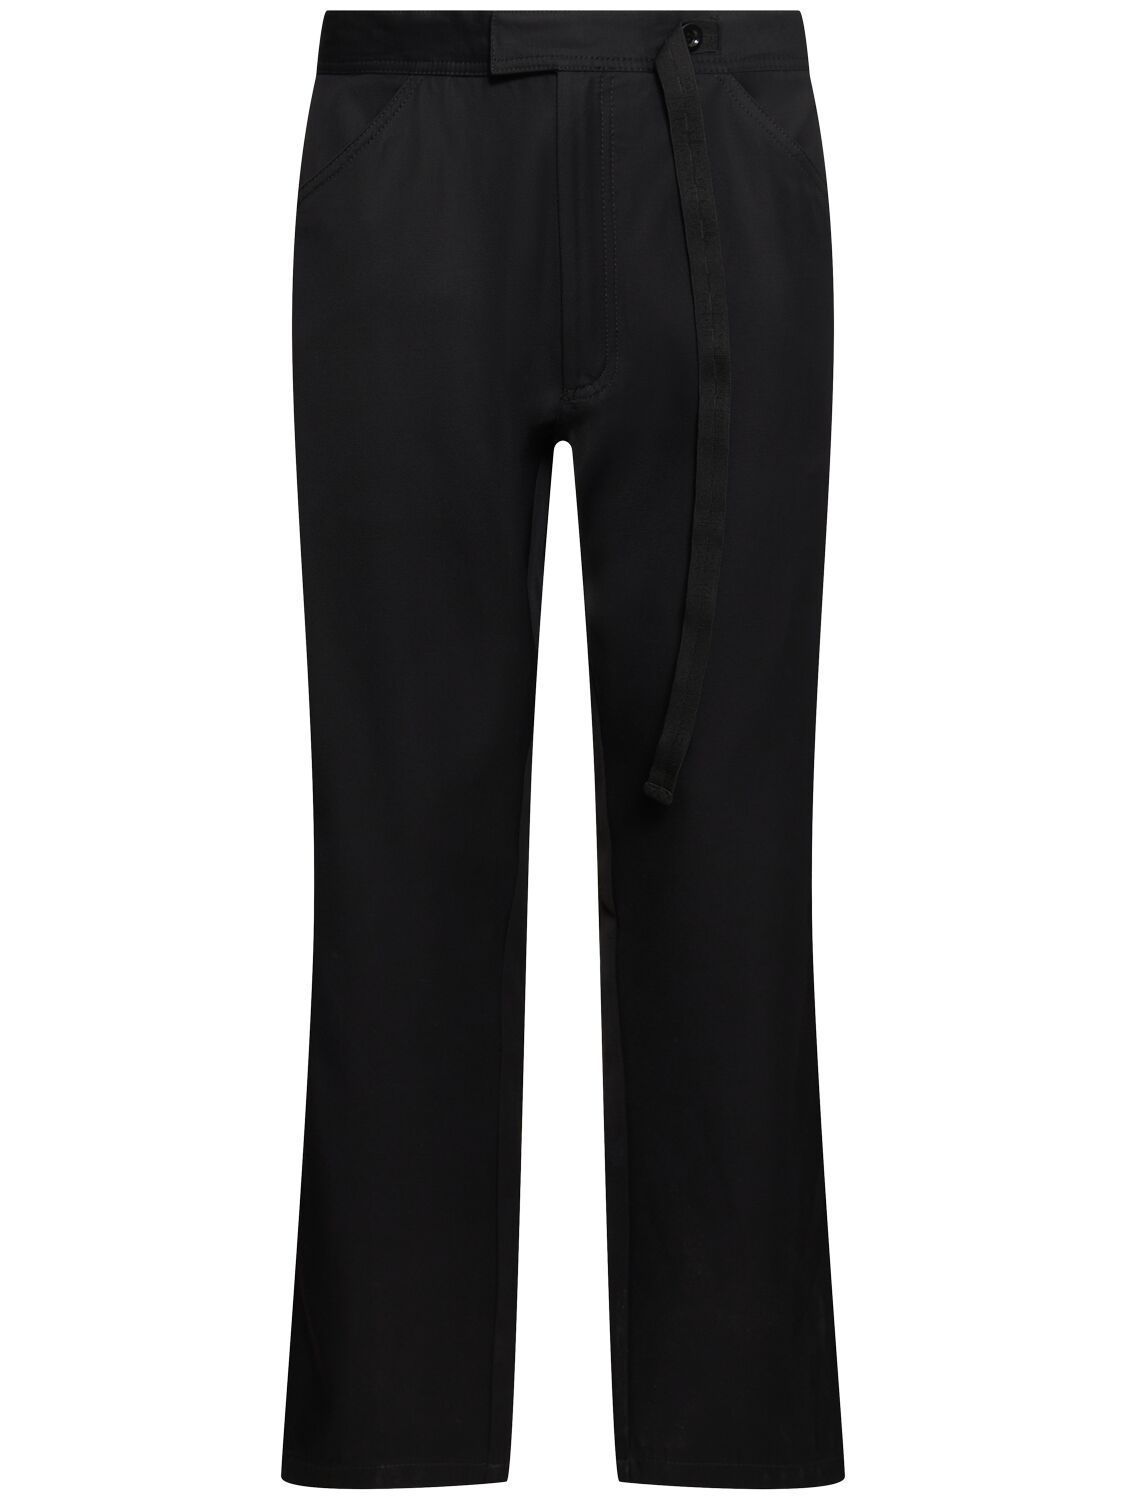 Image of Viscose & Cotton Twill Formal Pants